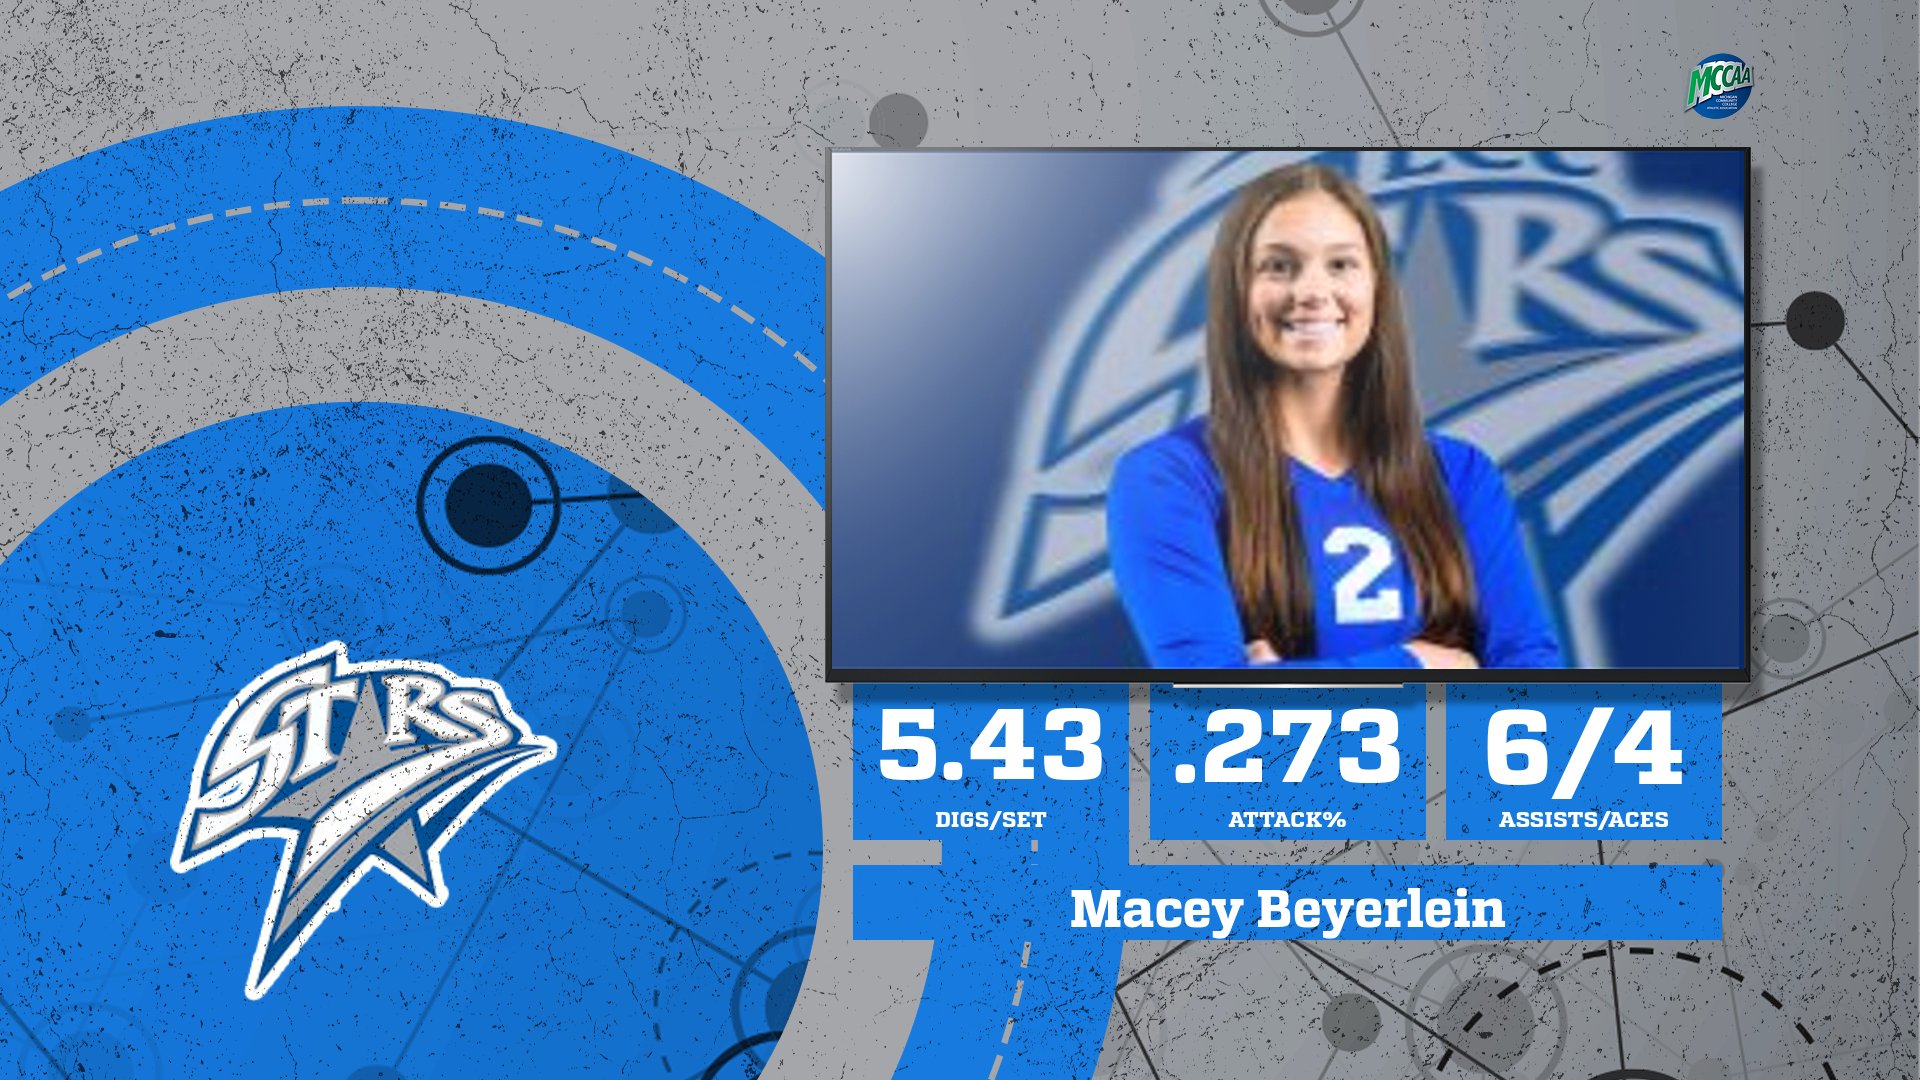 Macey Beyerlein, Lansing CC, is the Final MCCAA Western Conference Volleyball Defensive Player of the Week